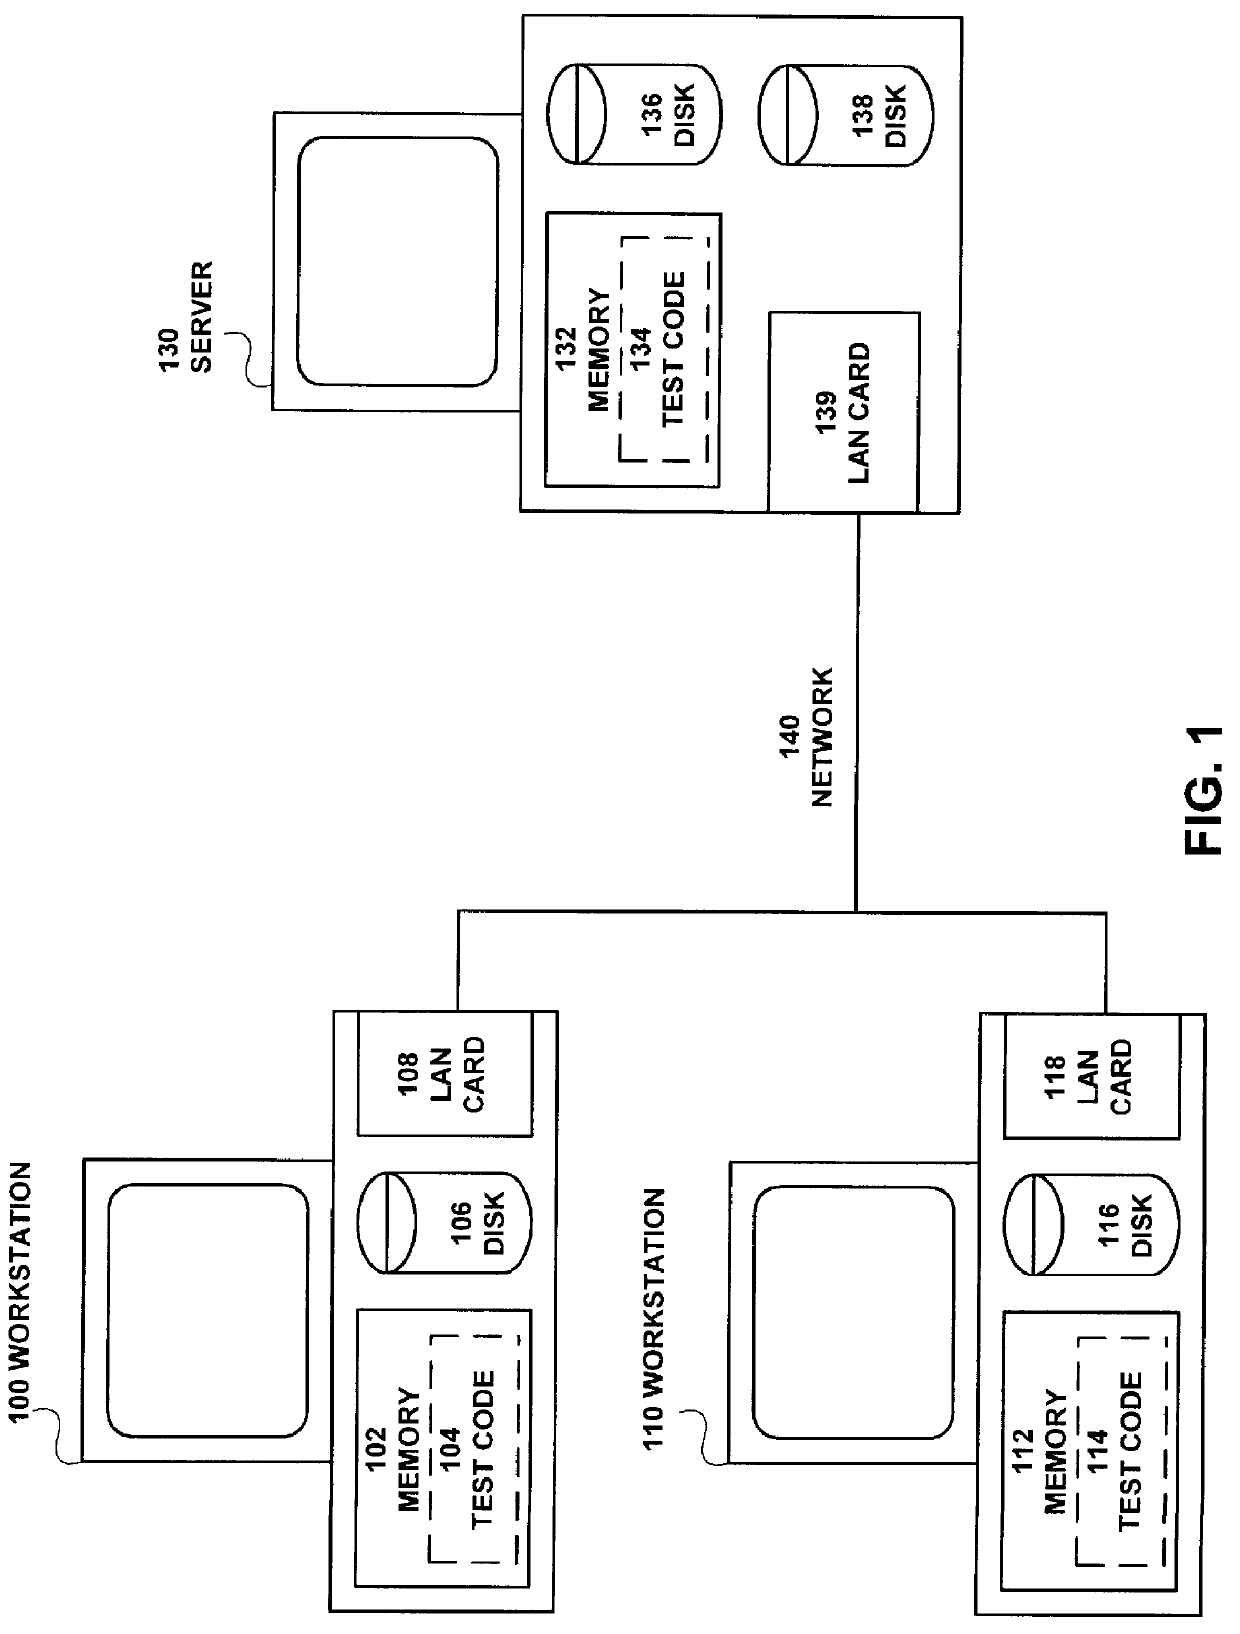 Method for determining a source of failure during a file system access